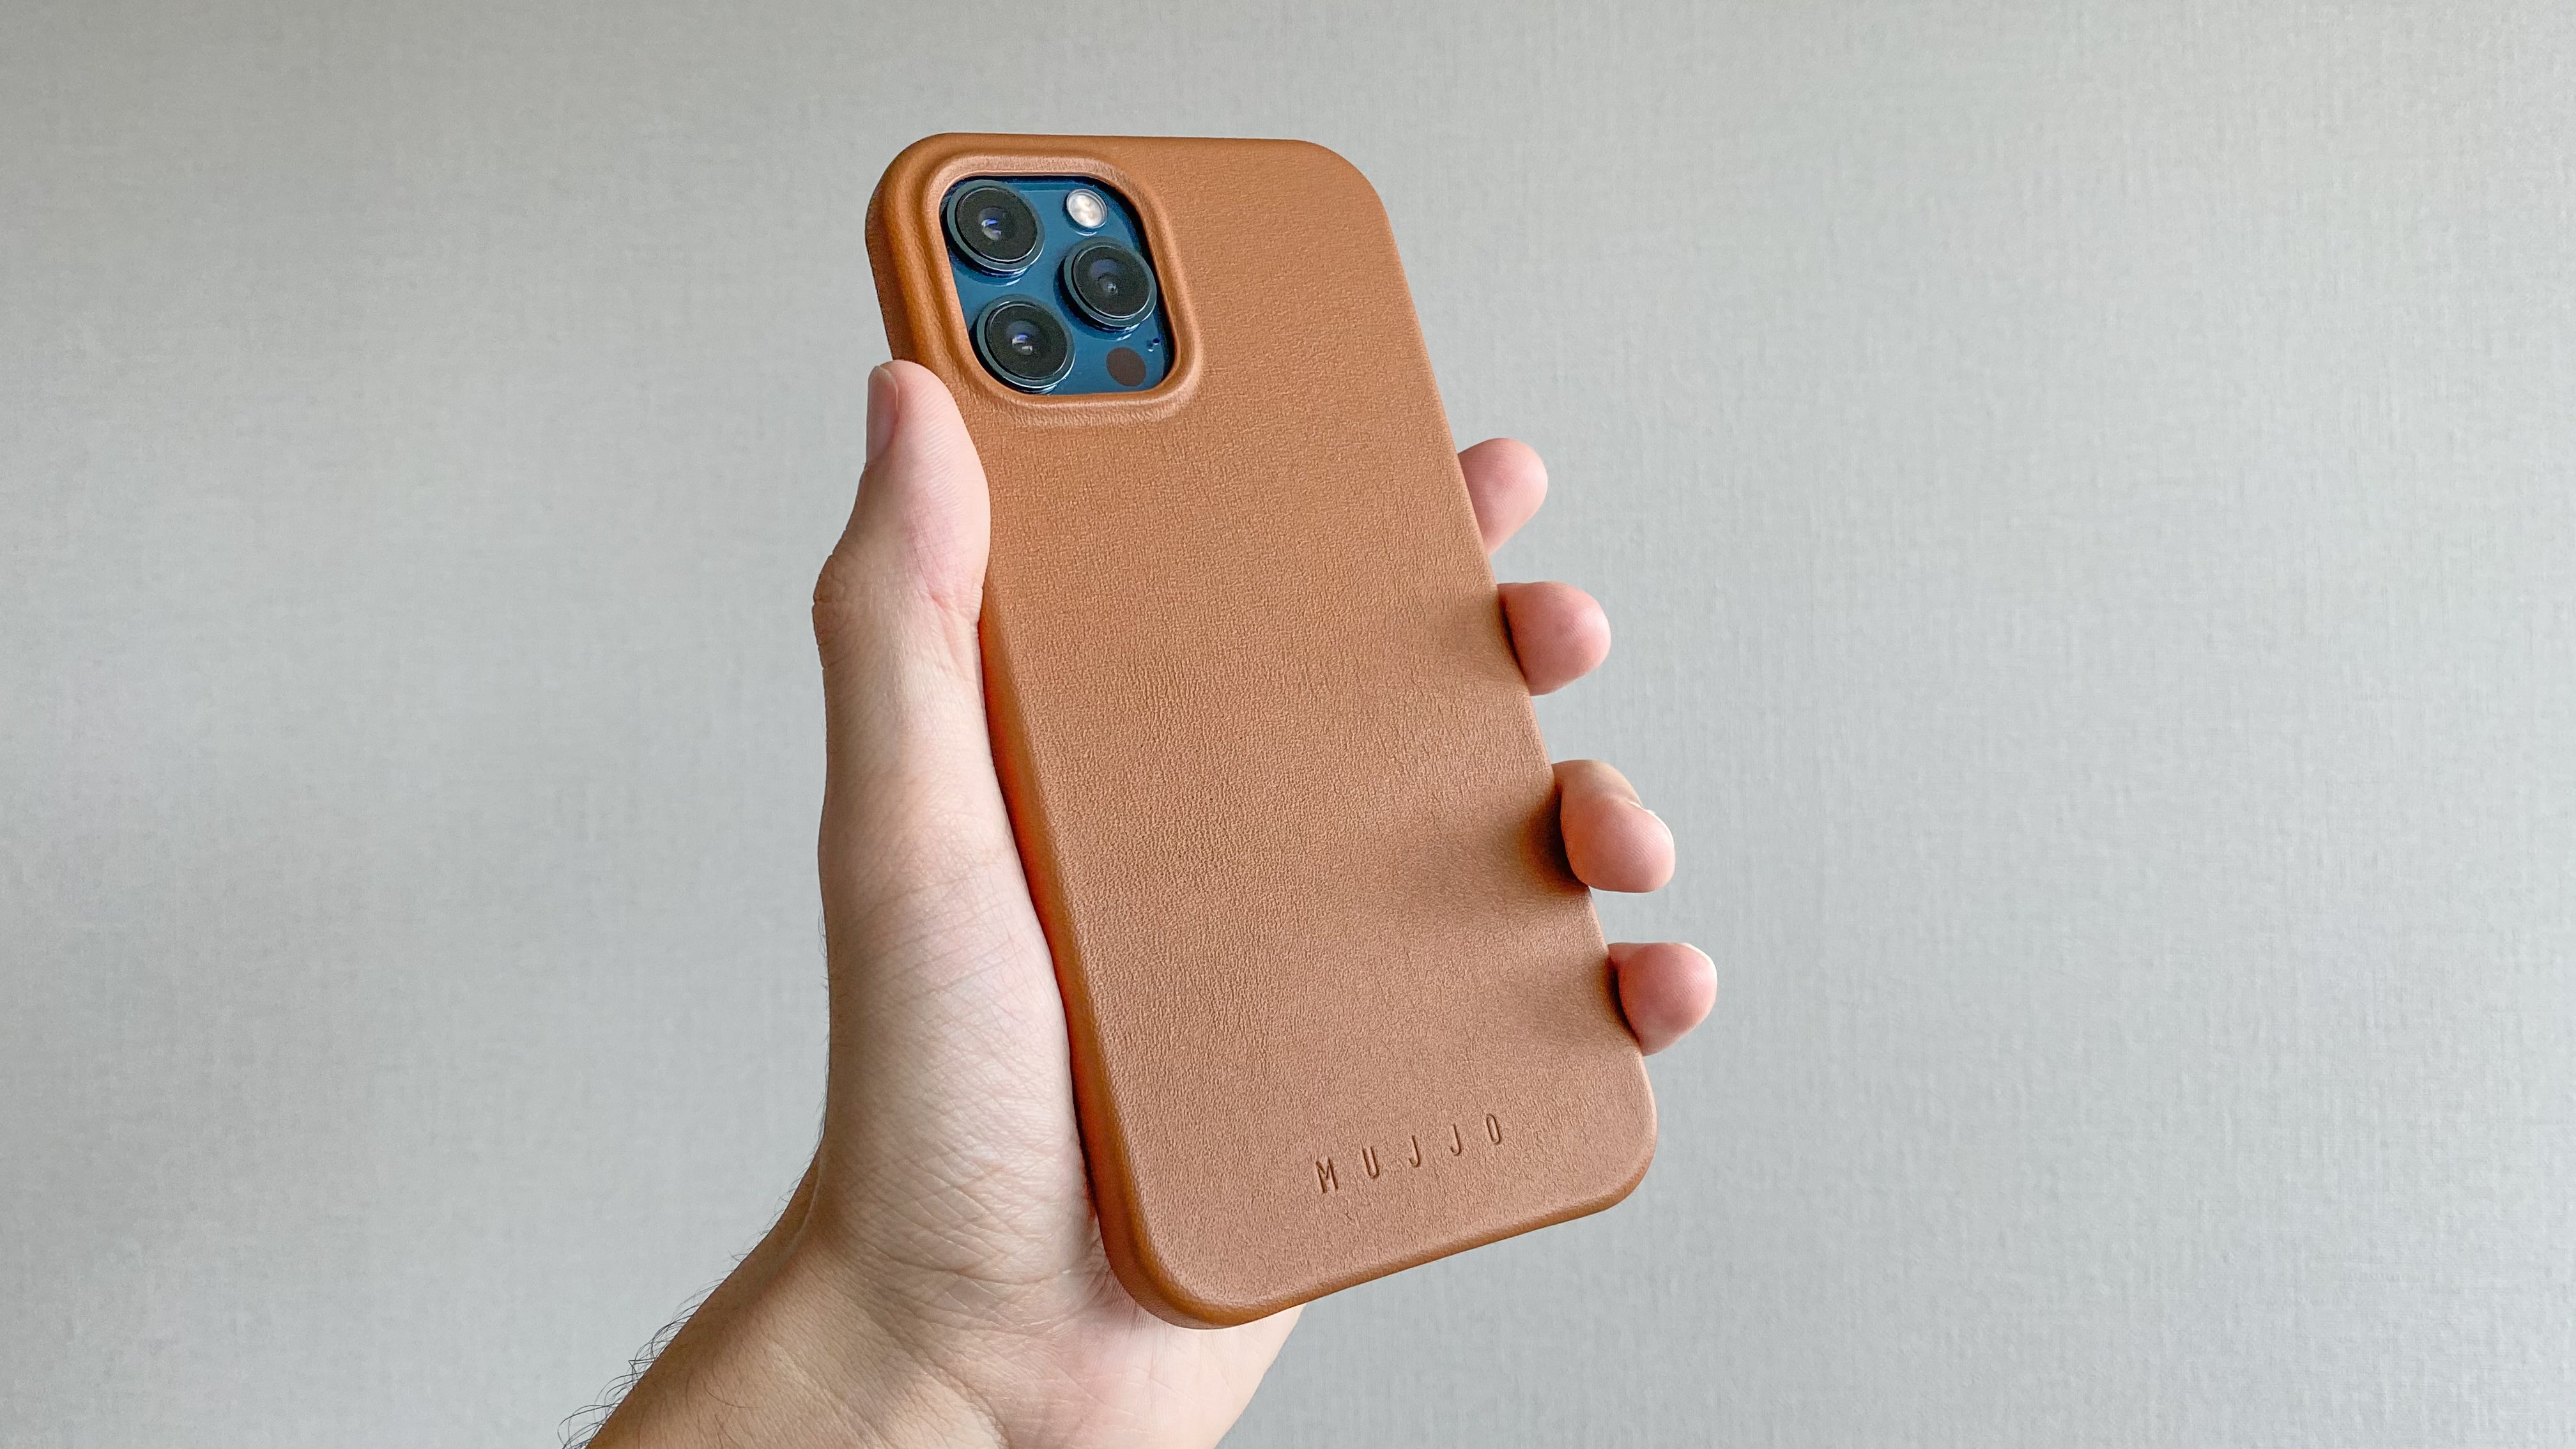 Apple's leather case for iPhone 12 gets an upgrade